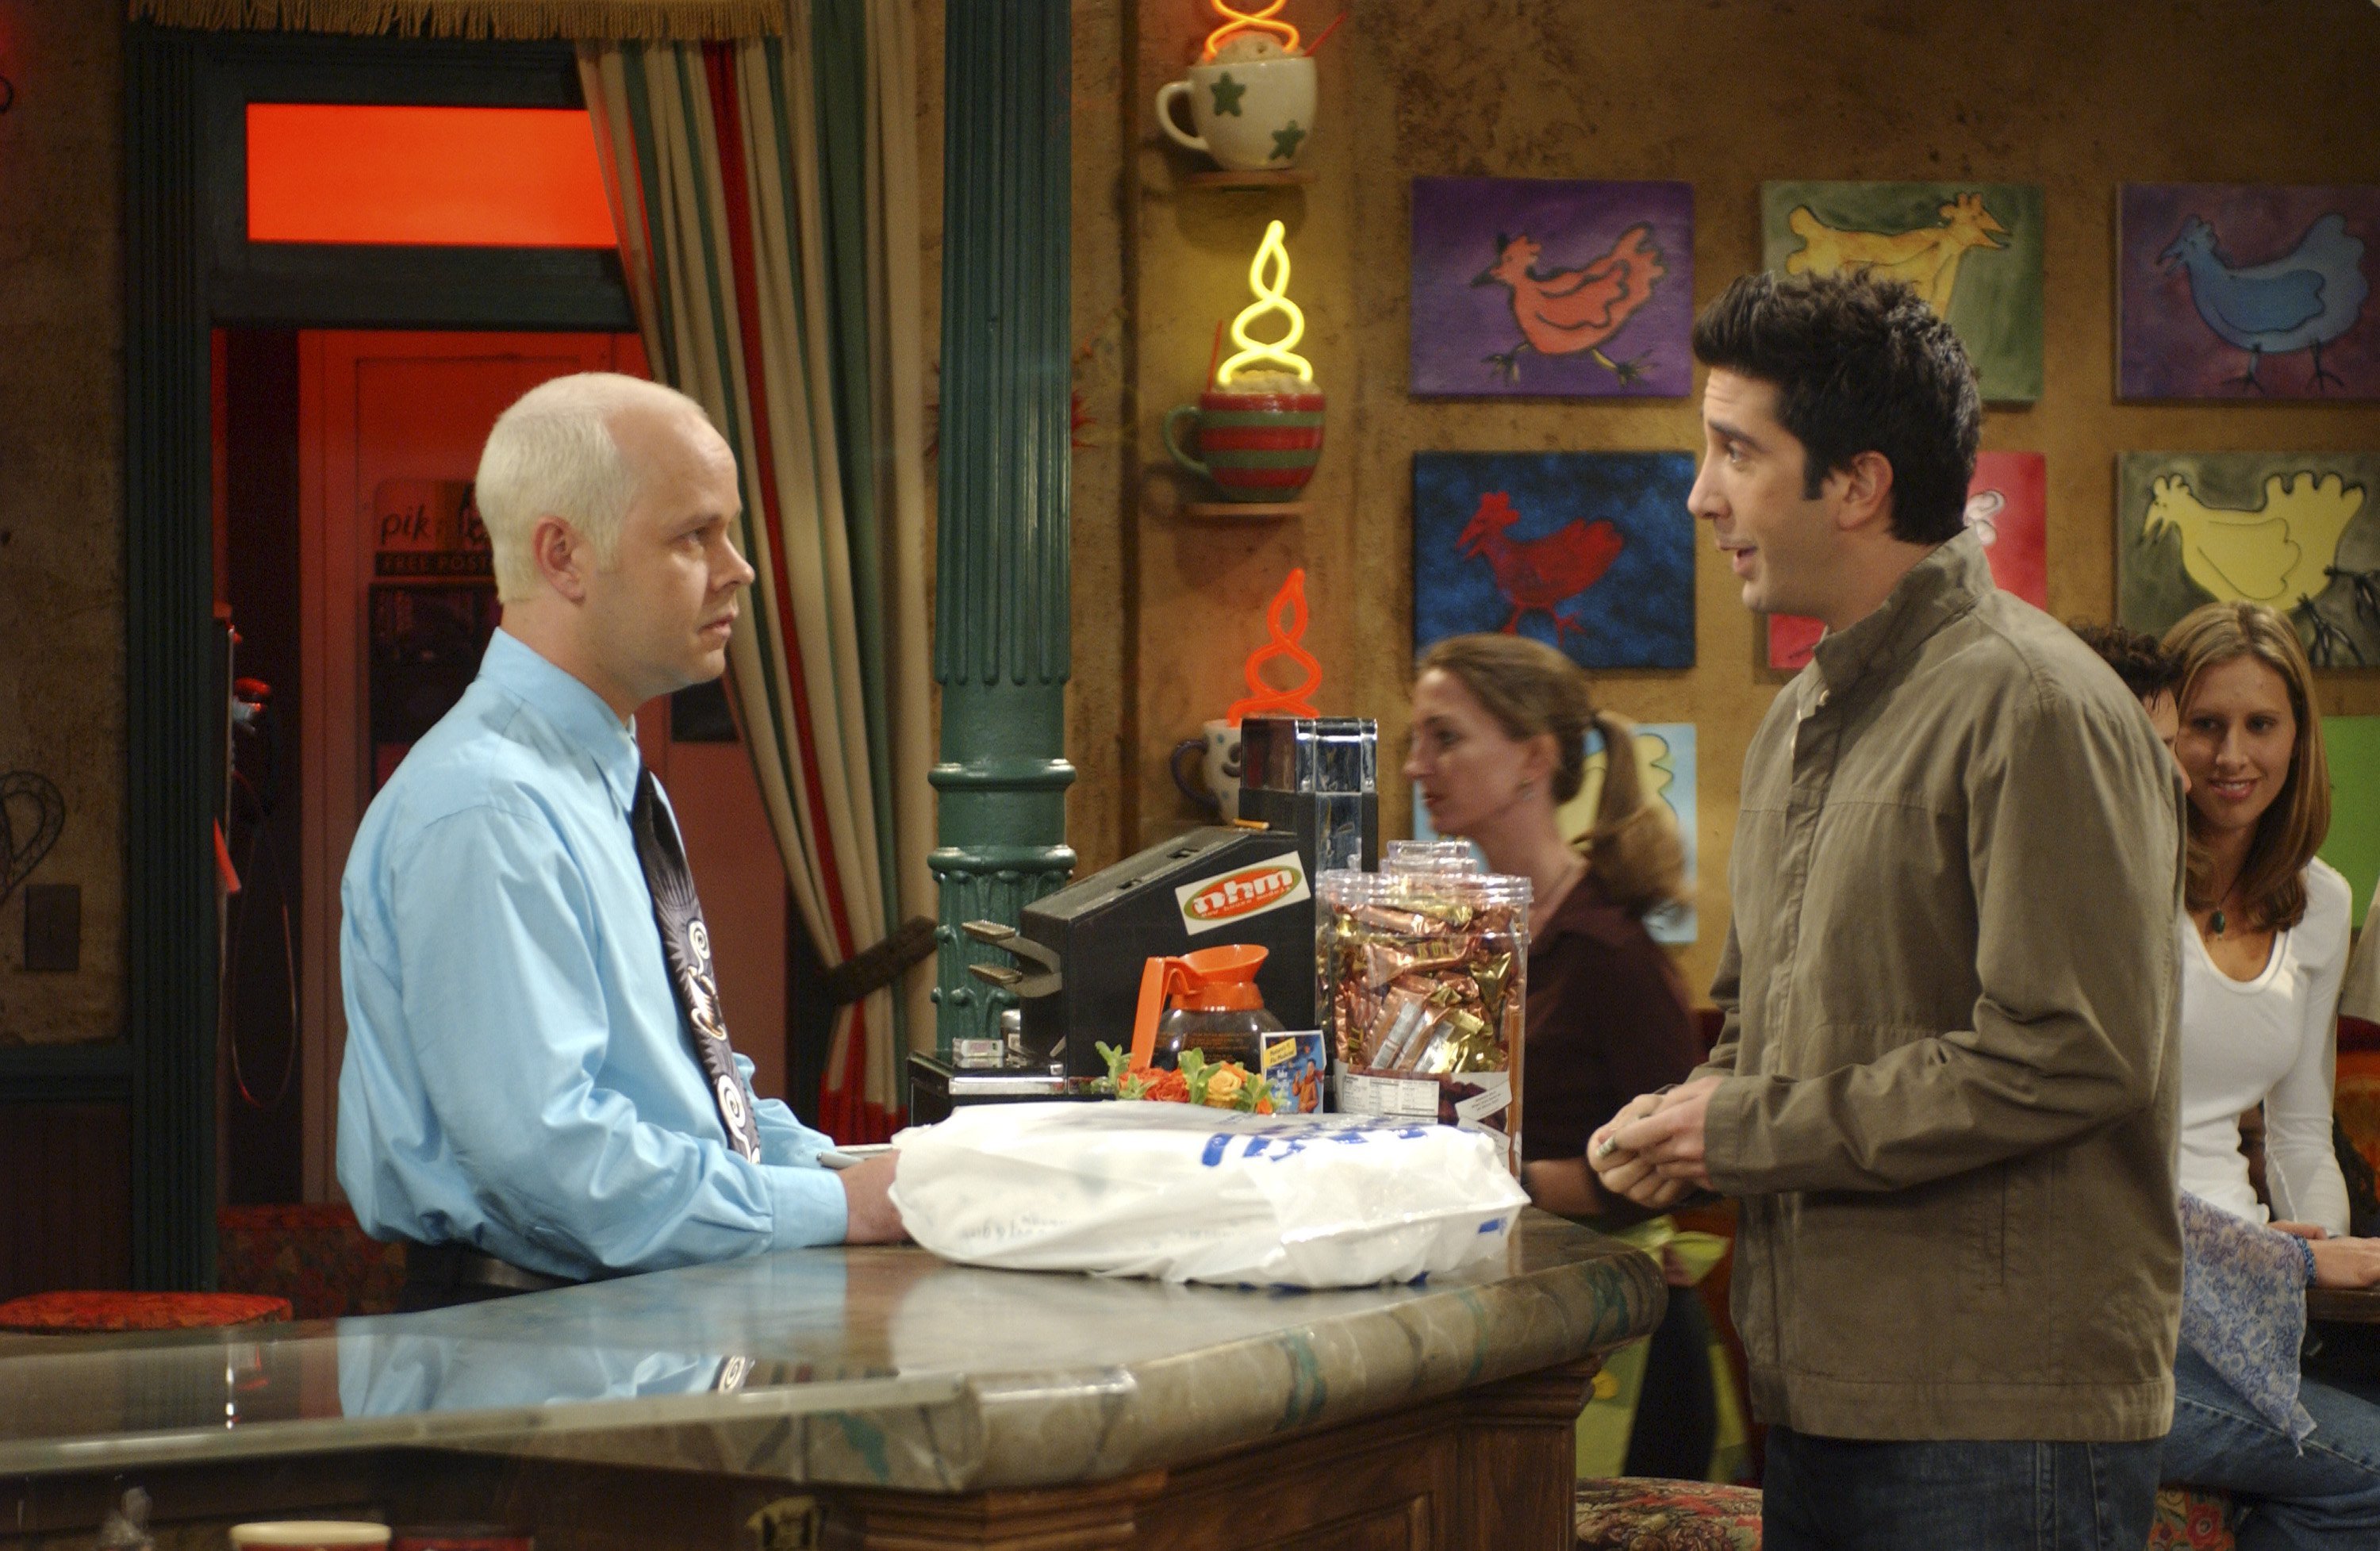 Gunther From ‘Friends’ and Penny From ‘The Big Bang Theory’ Have Something in Common